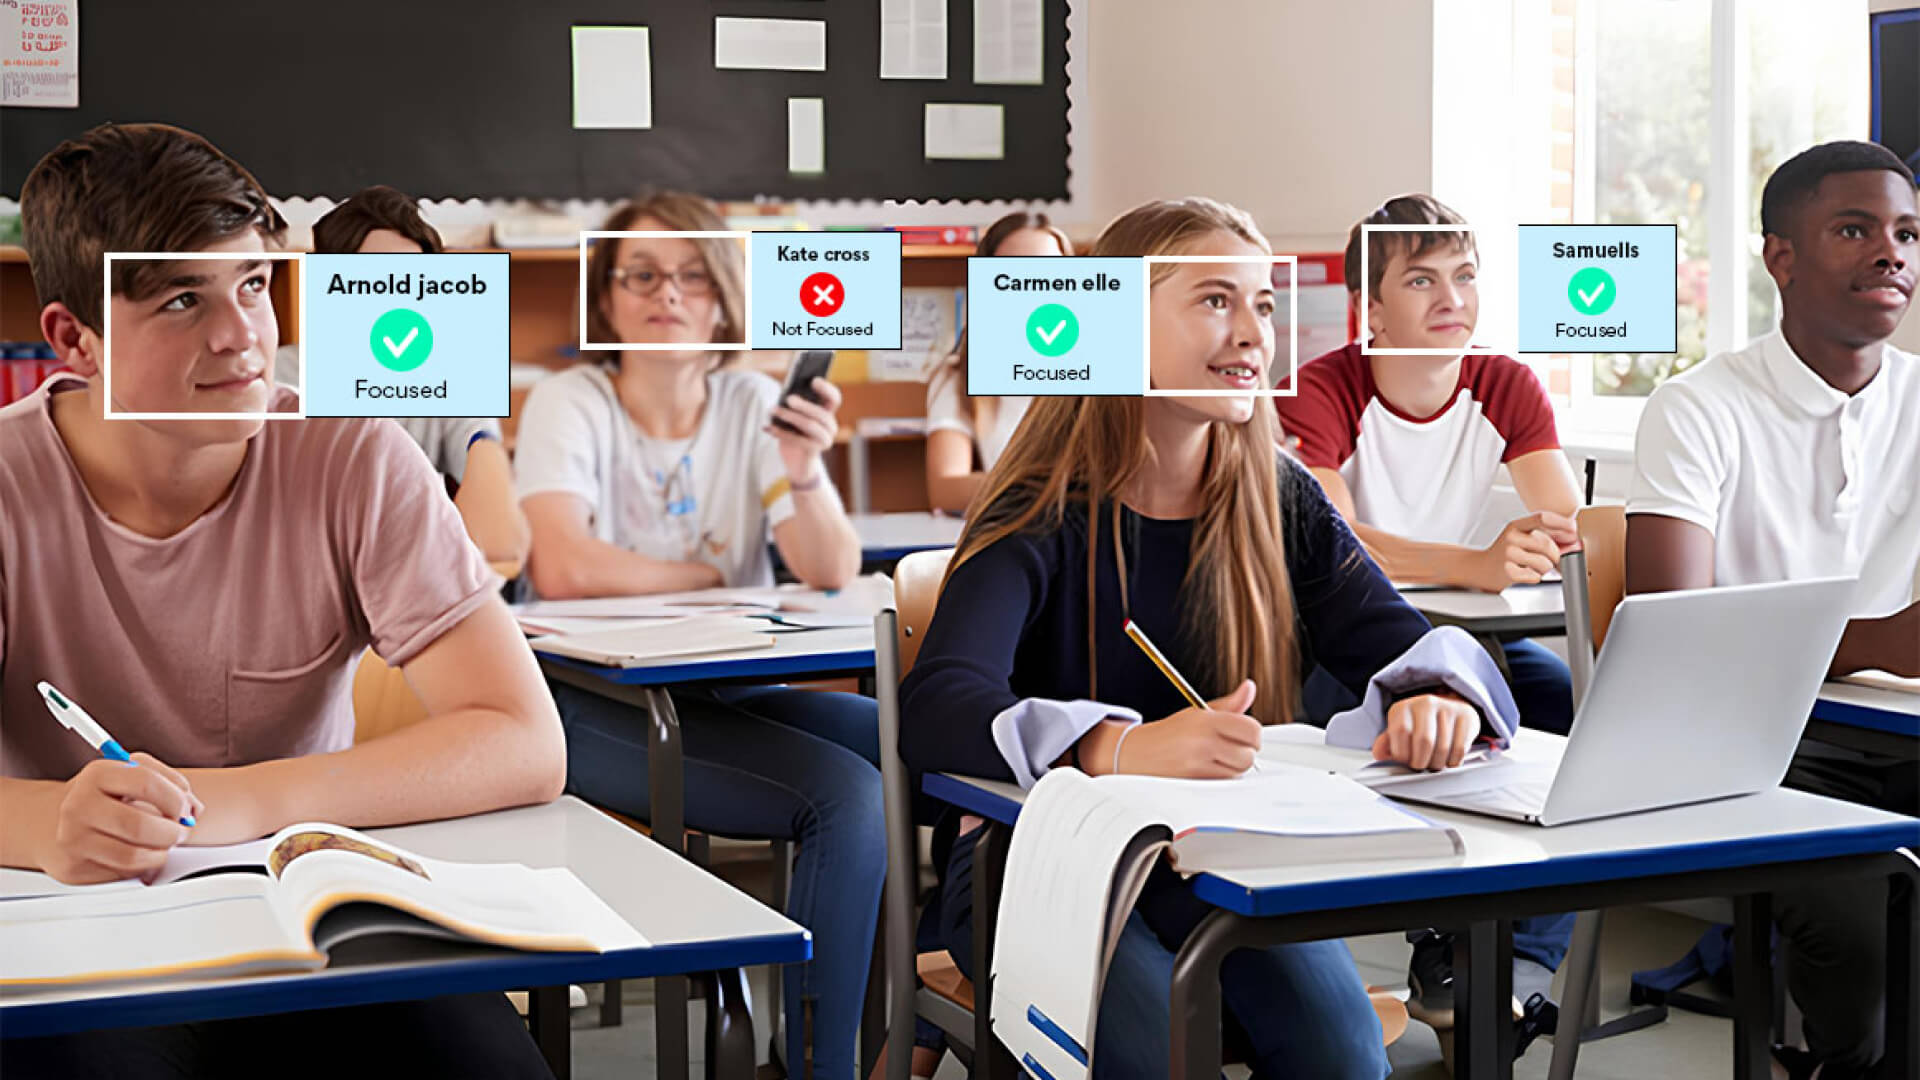  Use of facial recognition technology with digital signage in schools.